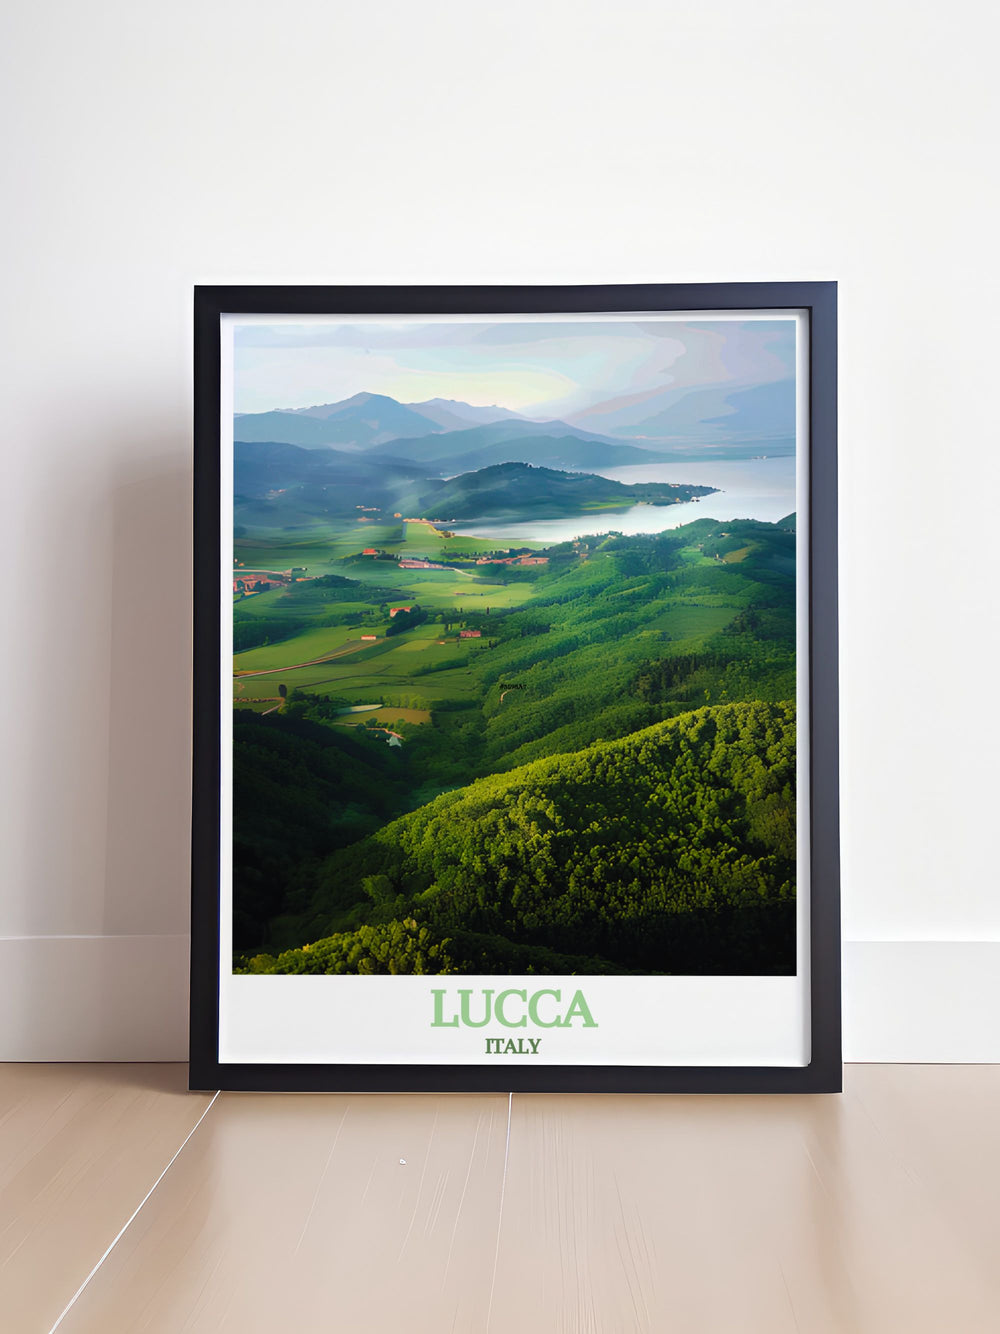 Colorful Lucca Art Print featuring the intricate street map design alongside the serene beauty of Lago di Massaciuccoli ideal for adding a touch of Italian charm to your home decor